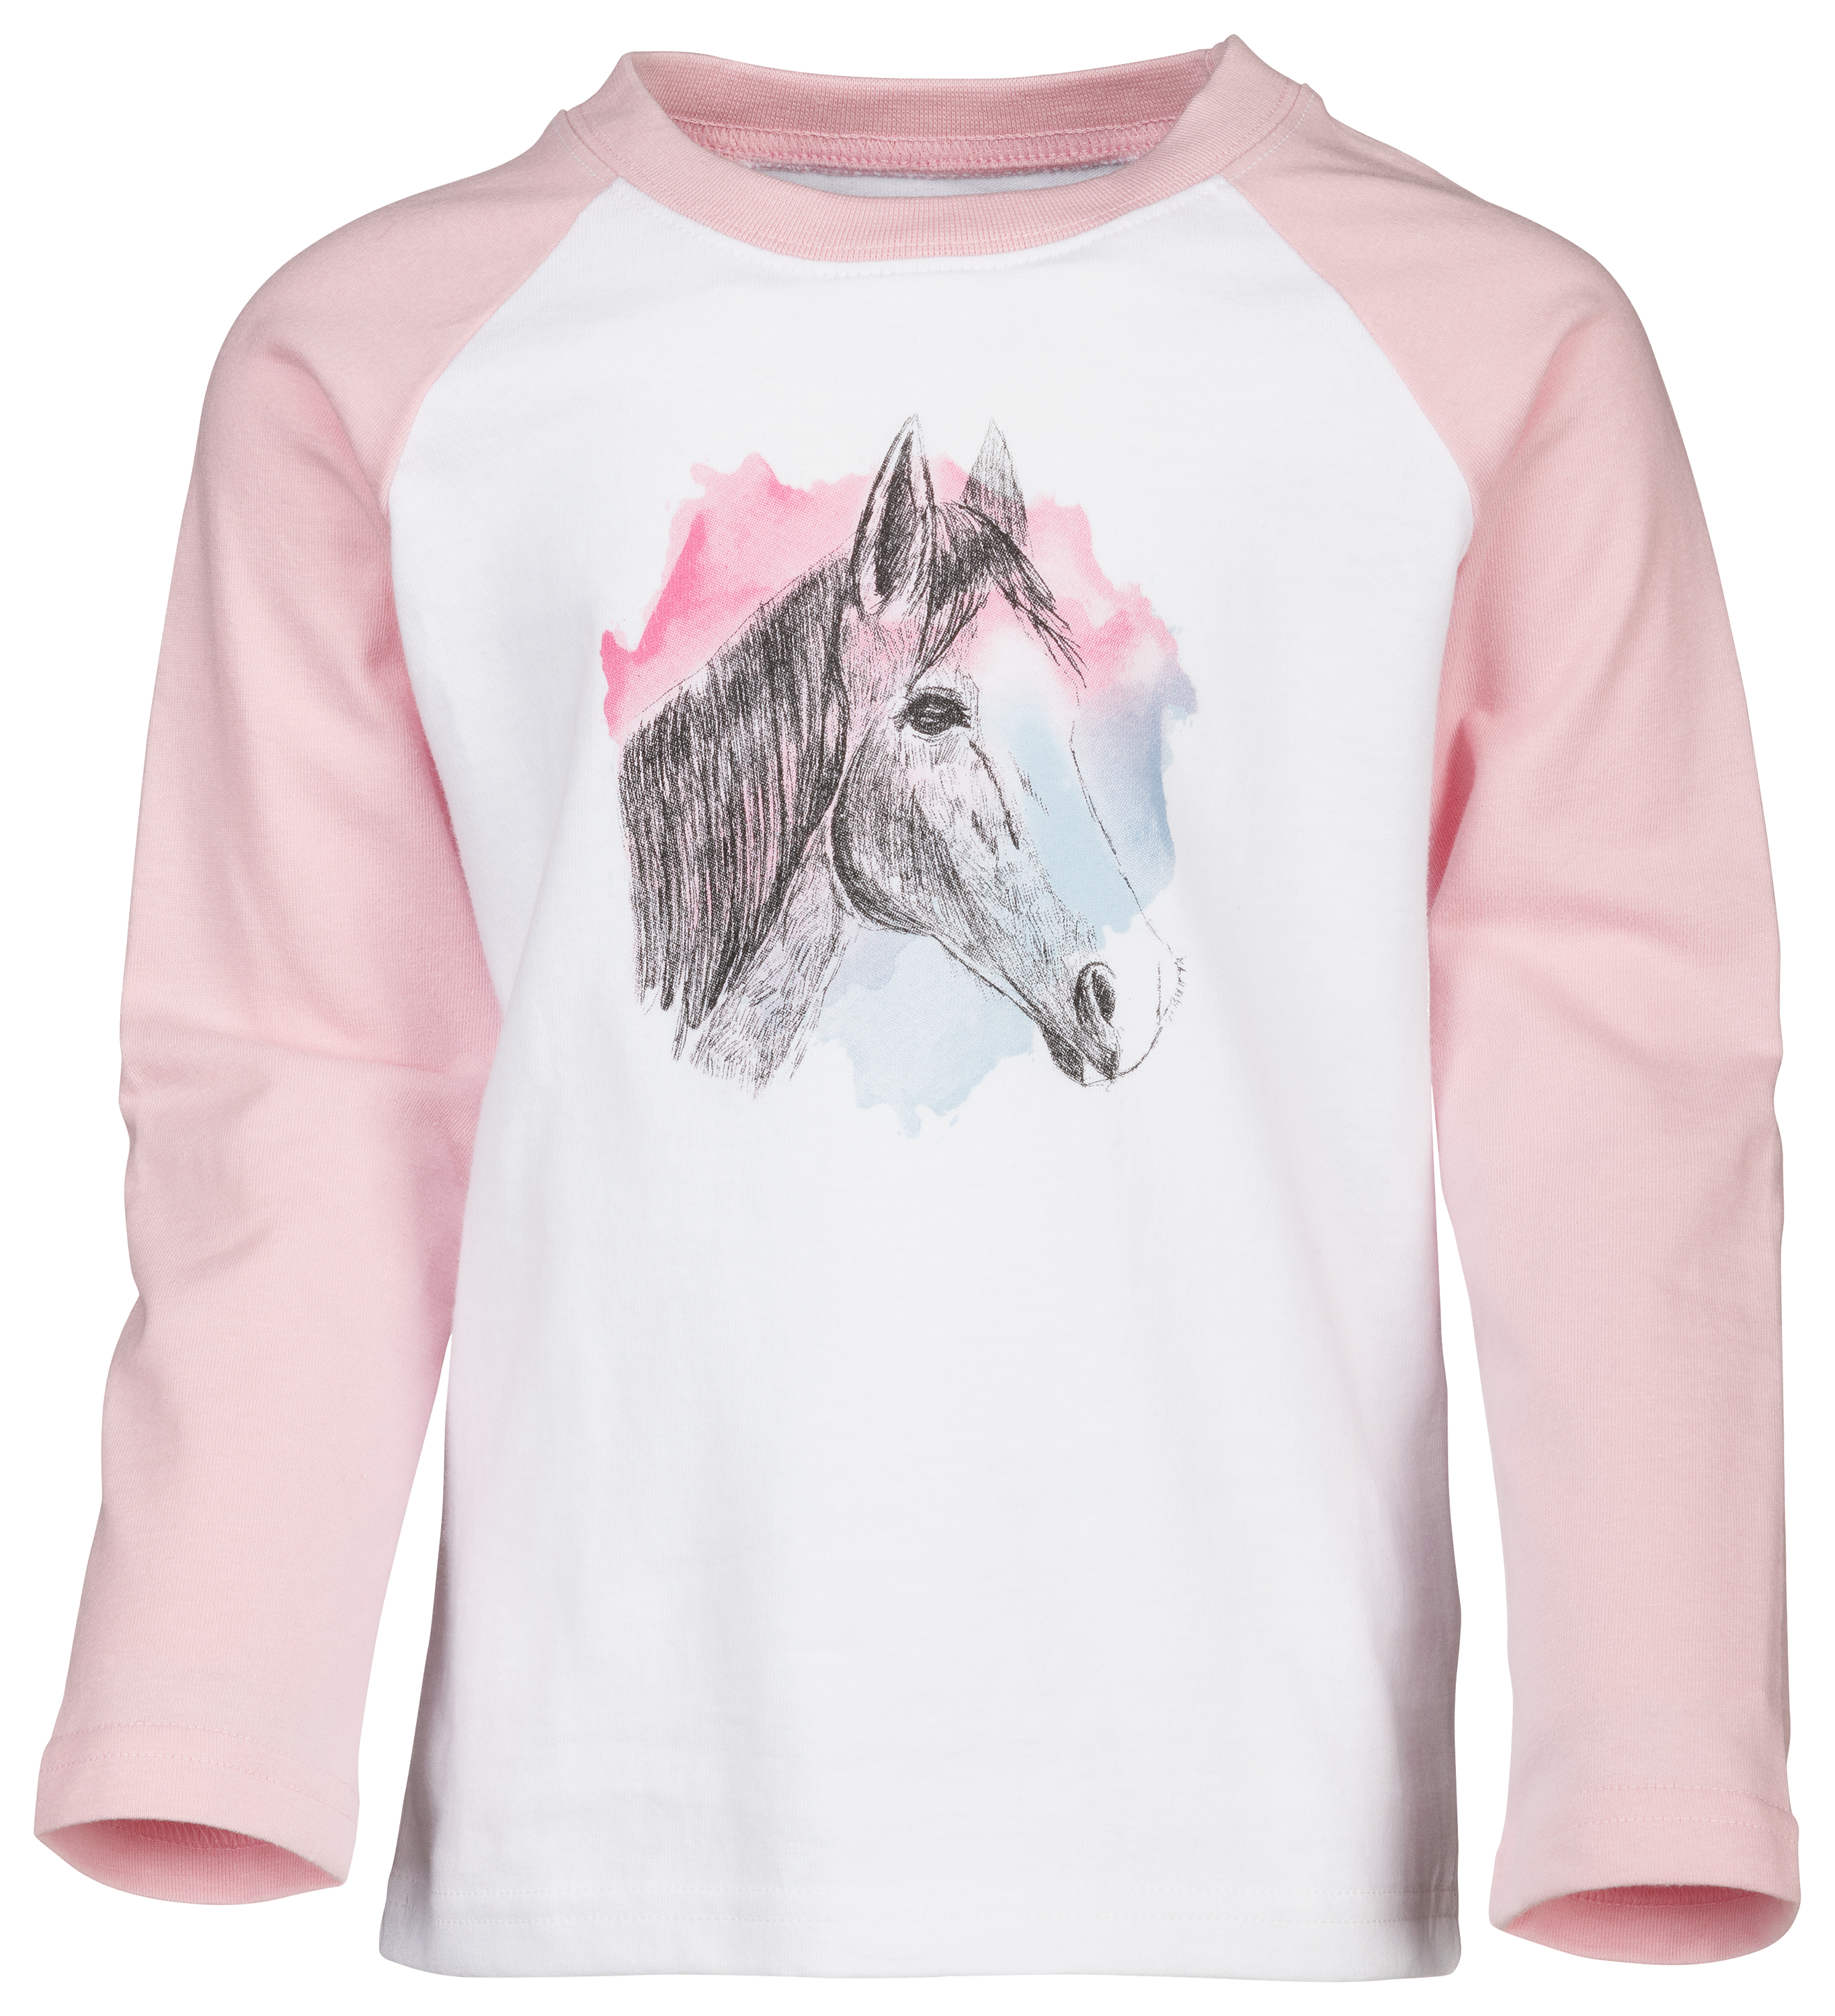 Outdoor Kids Horse Raglan Long-Sleeve T-Shirt for Toddlers or Kids